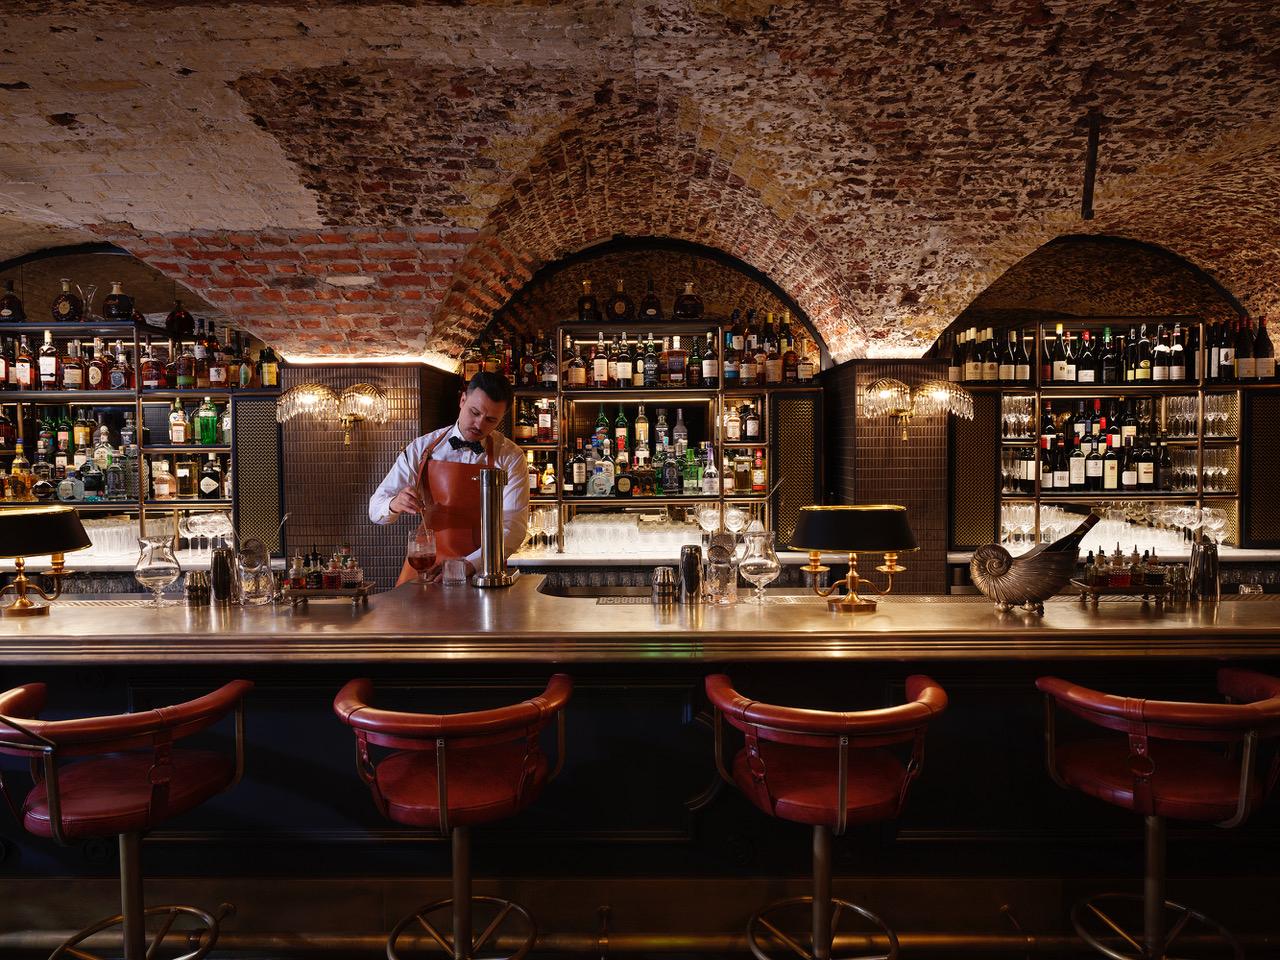 Luxury tavern bar with exposed brick walls, bartender crafting drinks